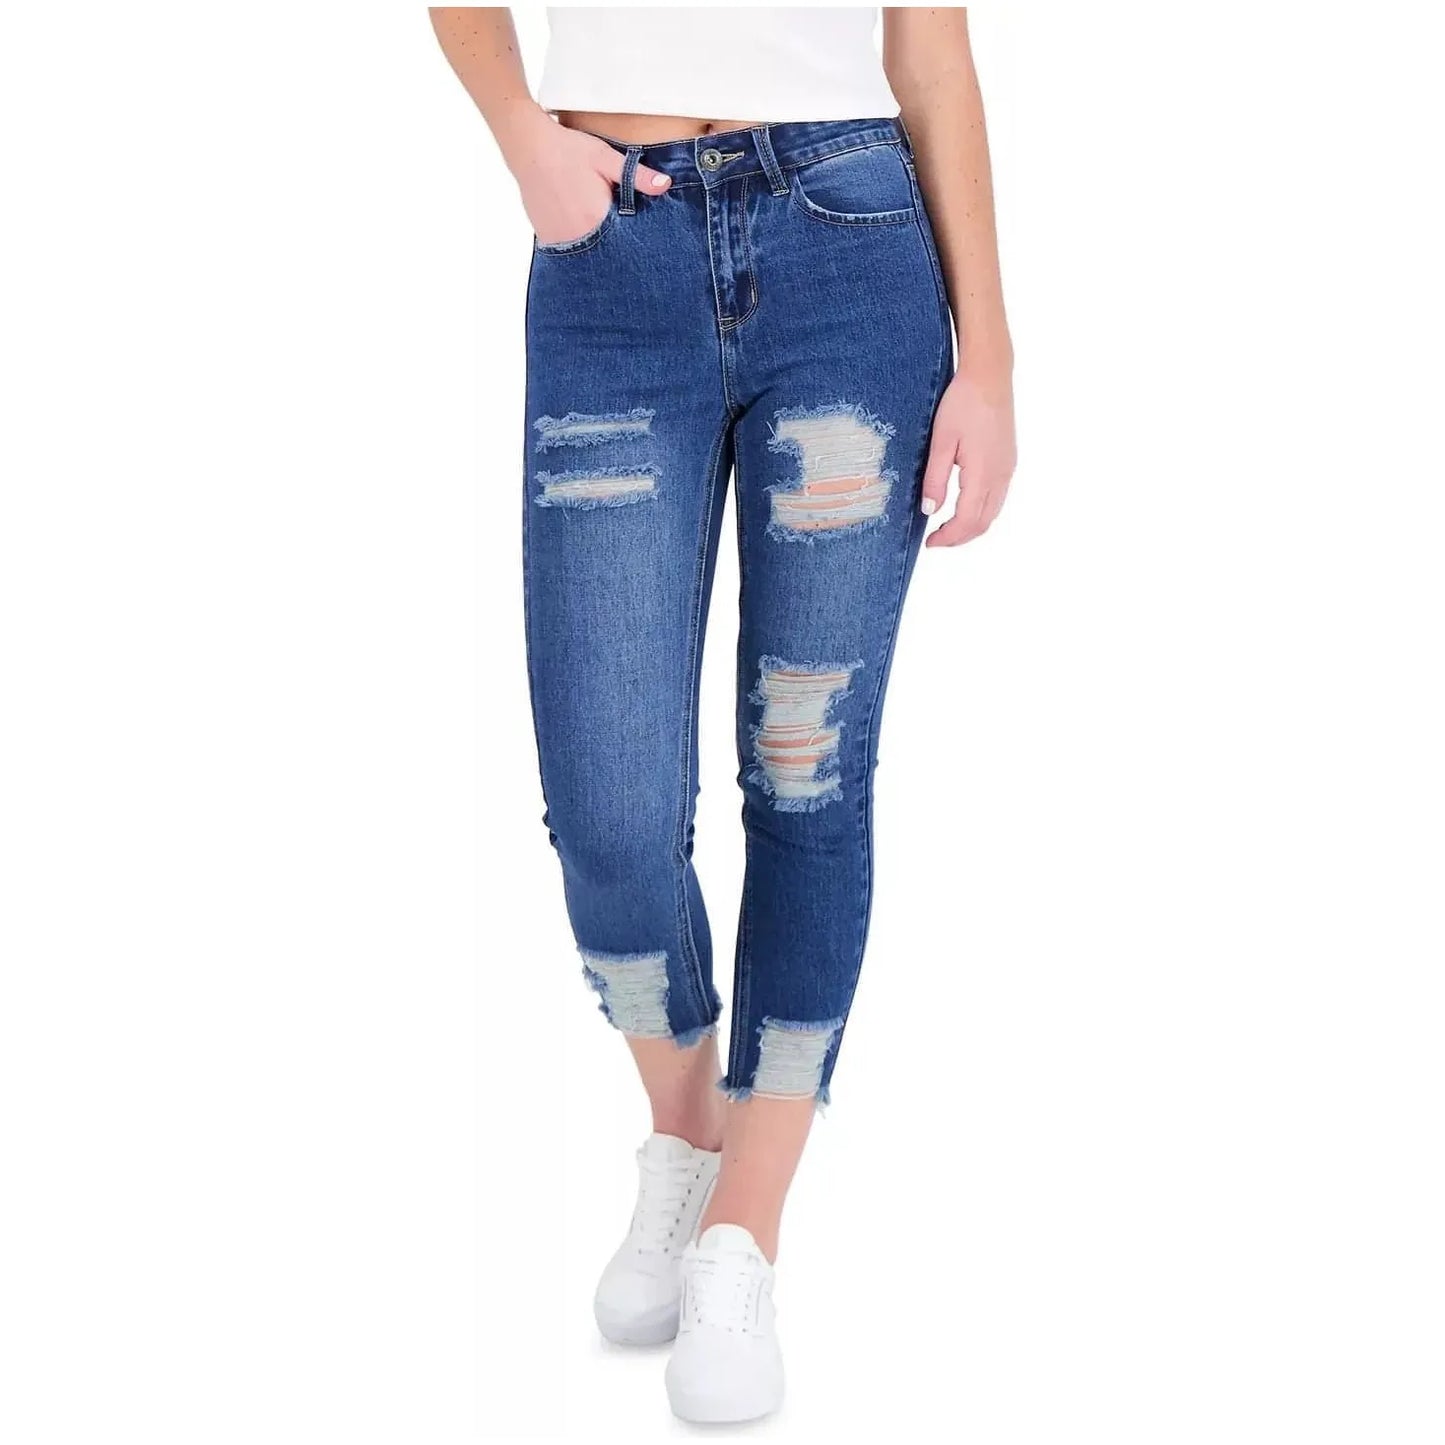 Gogo Jeans Juniors Ripped Cropped Skinny Jeans, Blue, Size: 11 - Brandat Outlet